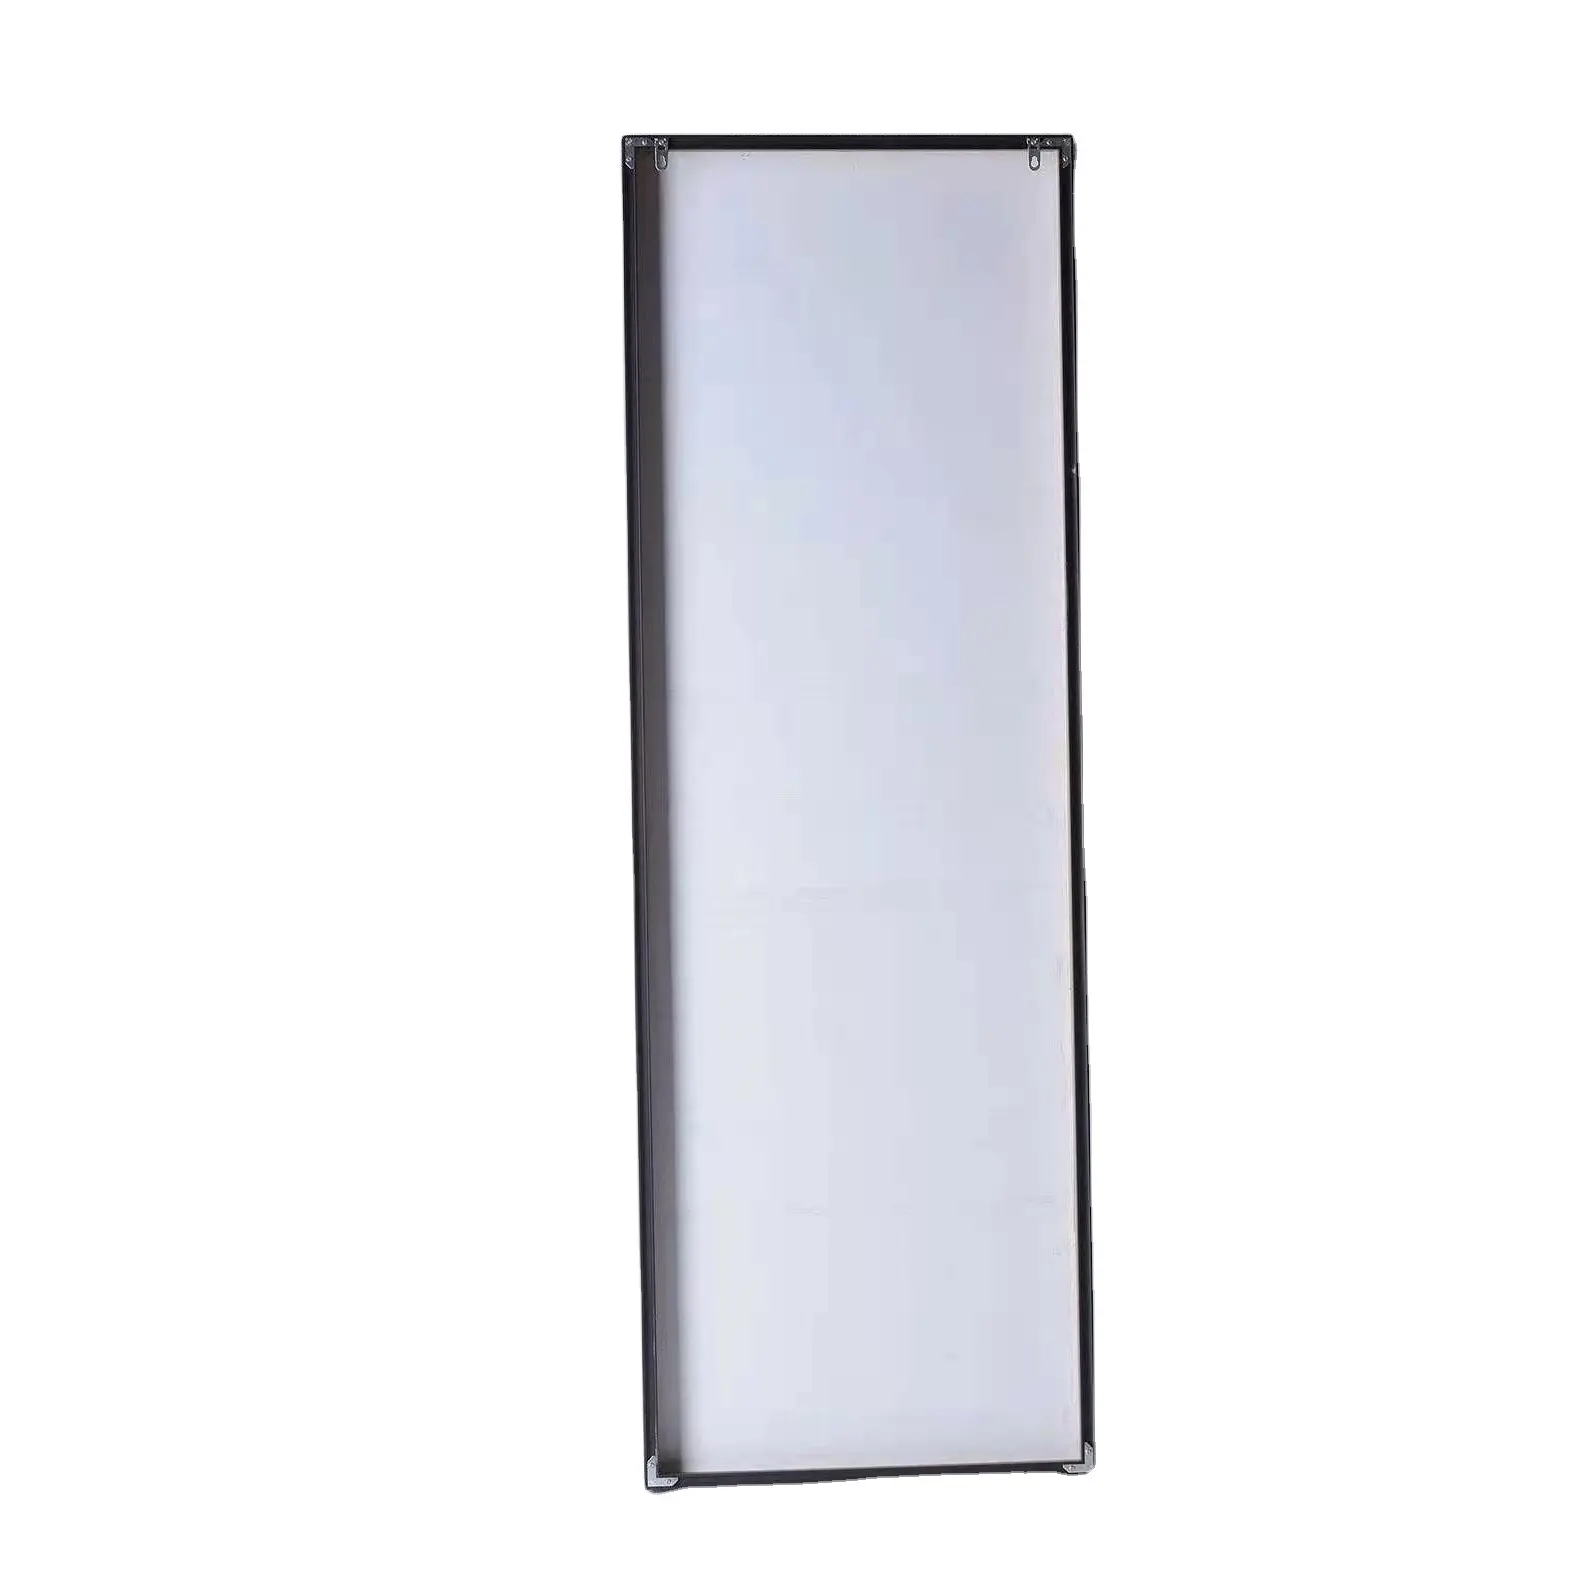 oval aluminum alloy frame mirror make-up bathroom mirror wall hanging mirror for hotel